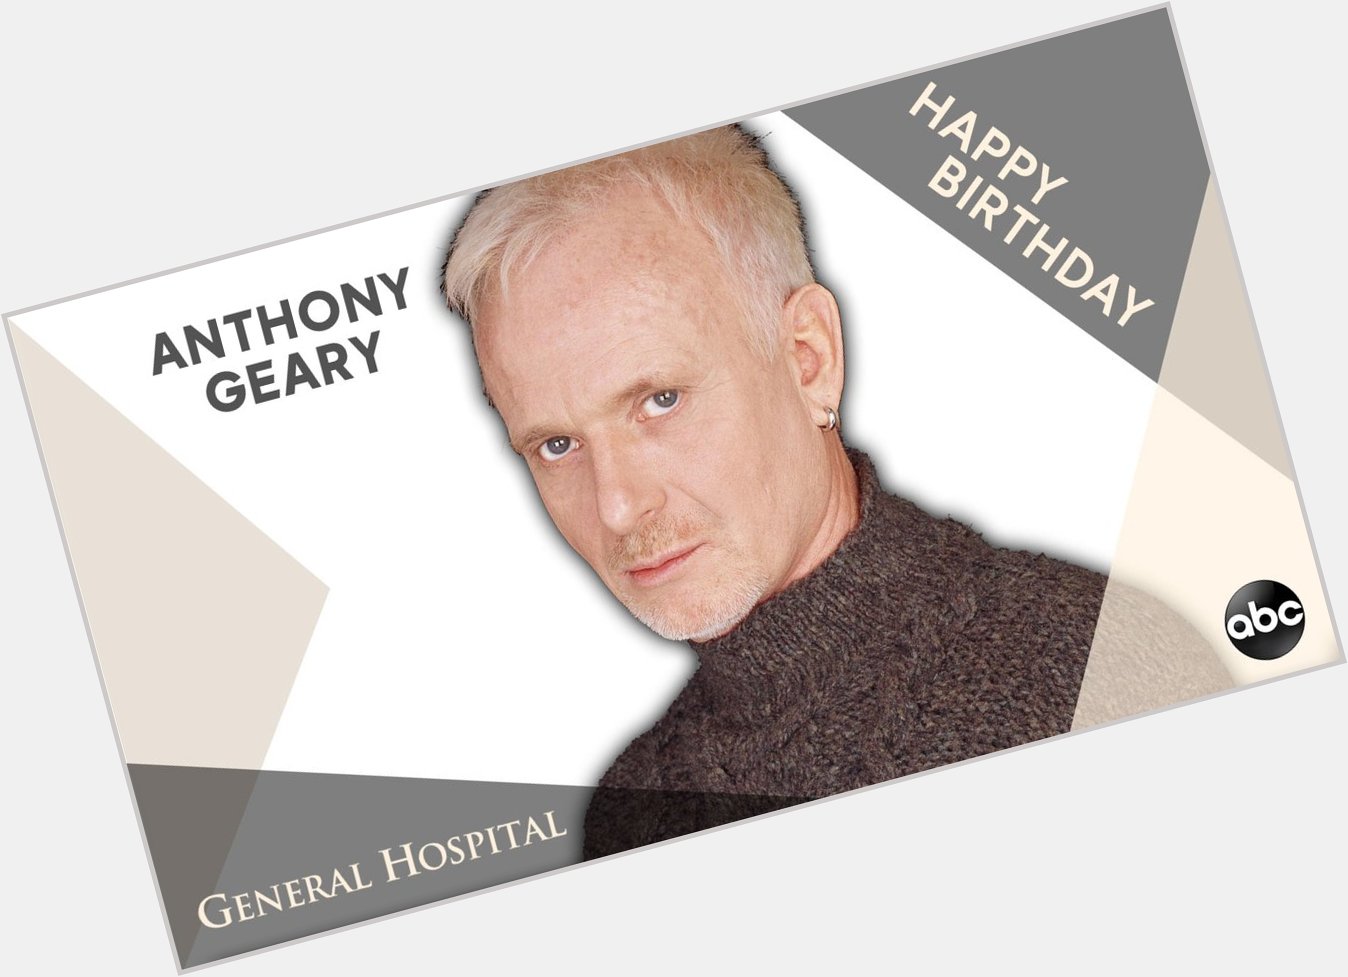  Please help us wish Anthony Geary a Happy Birthday!   